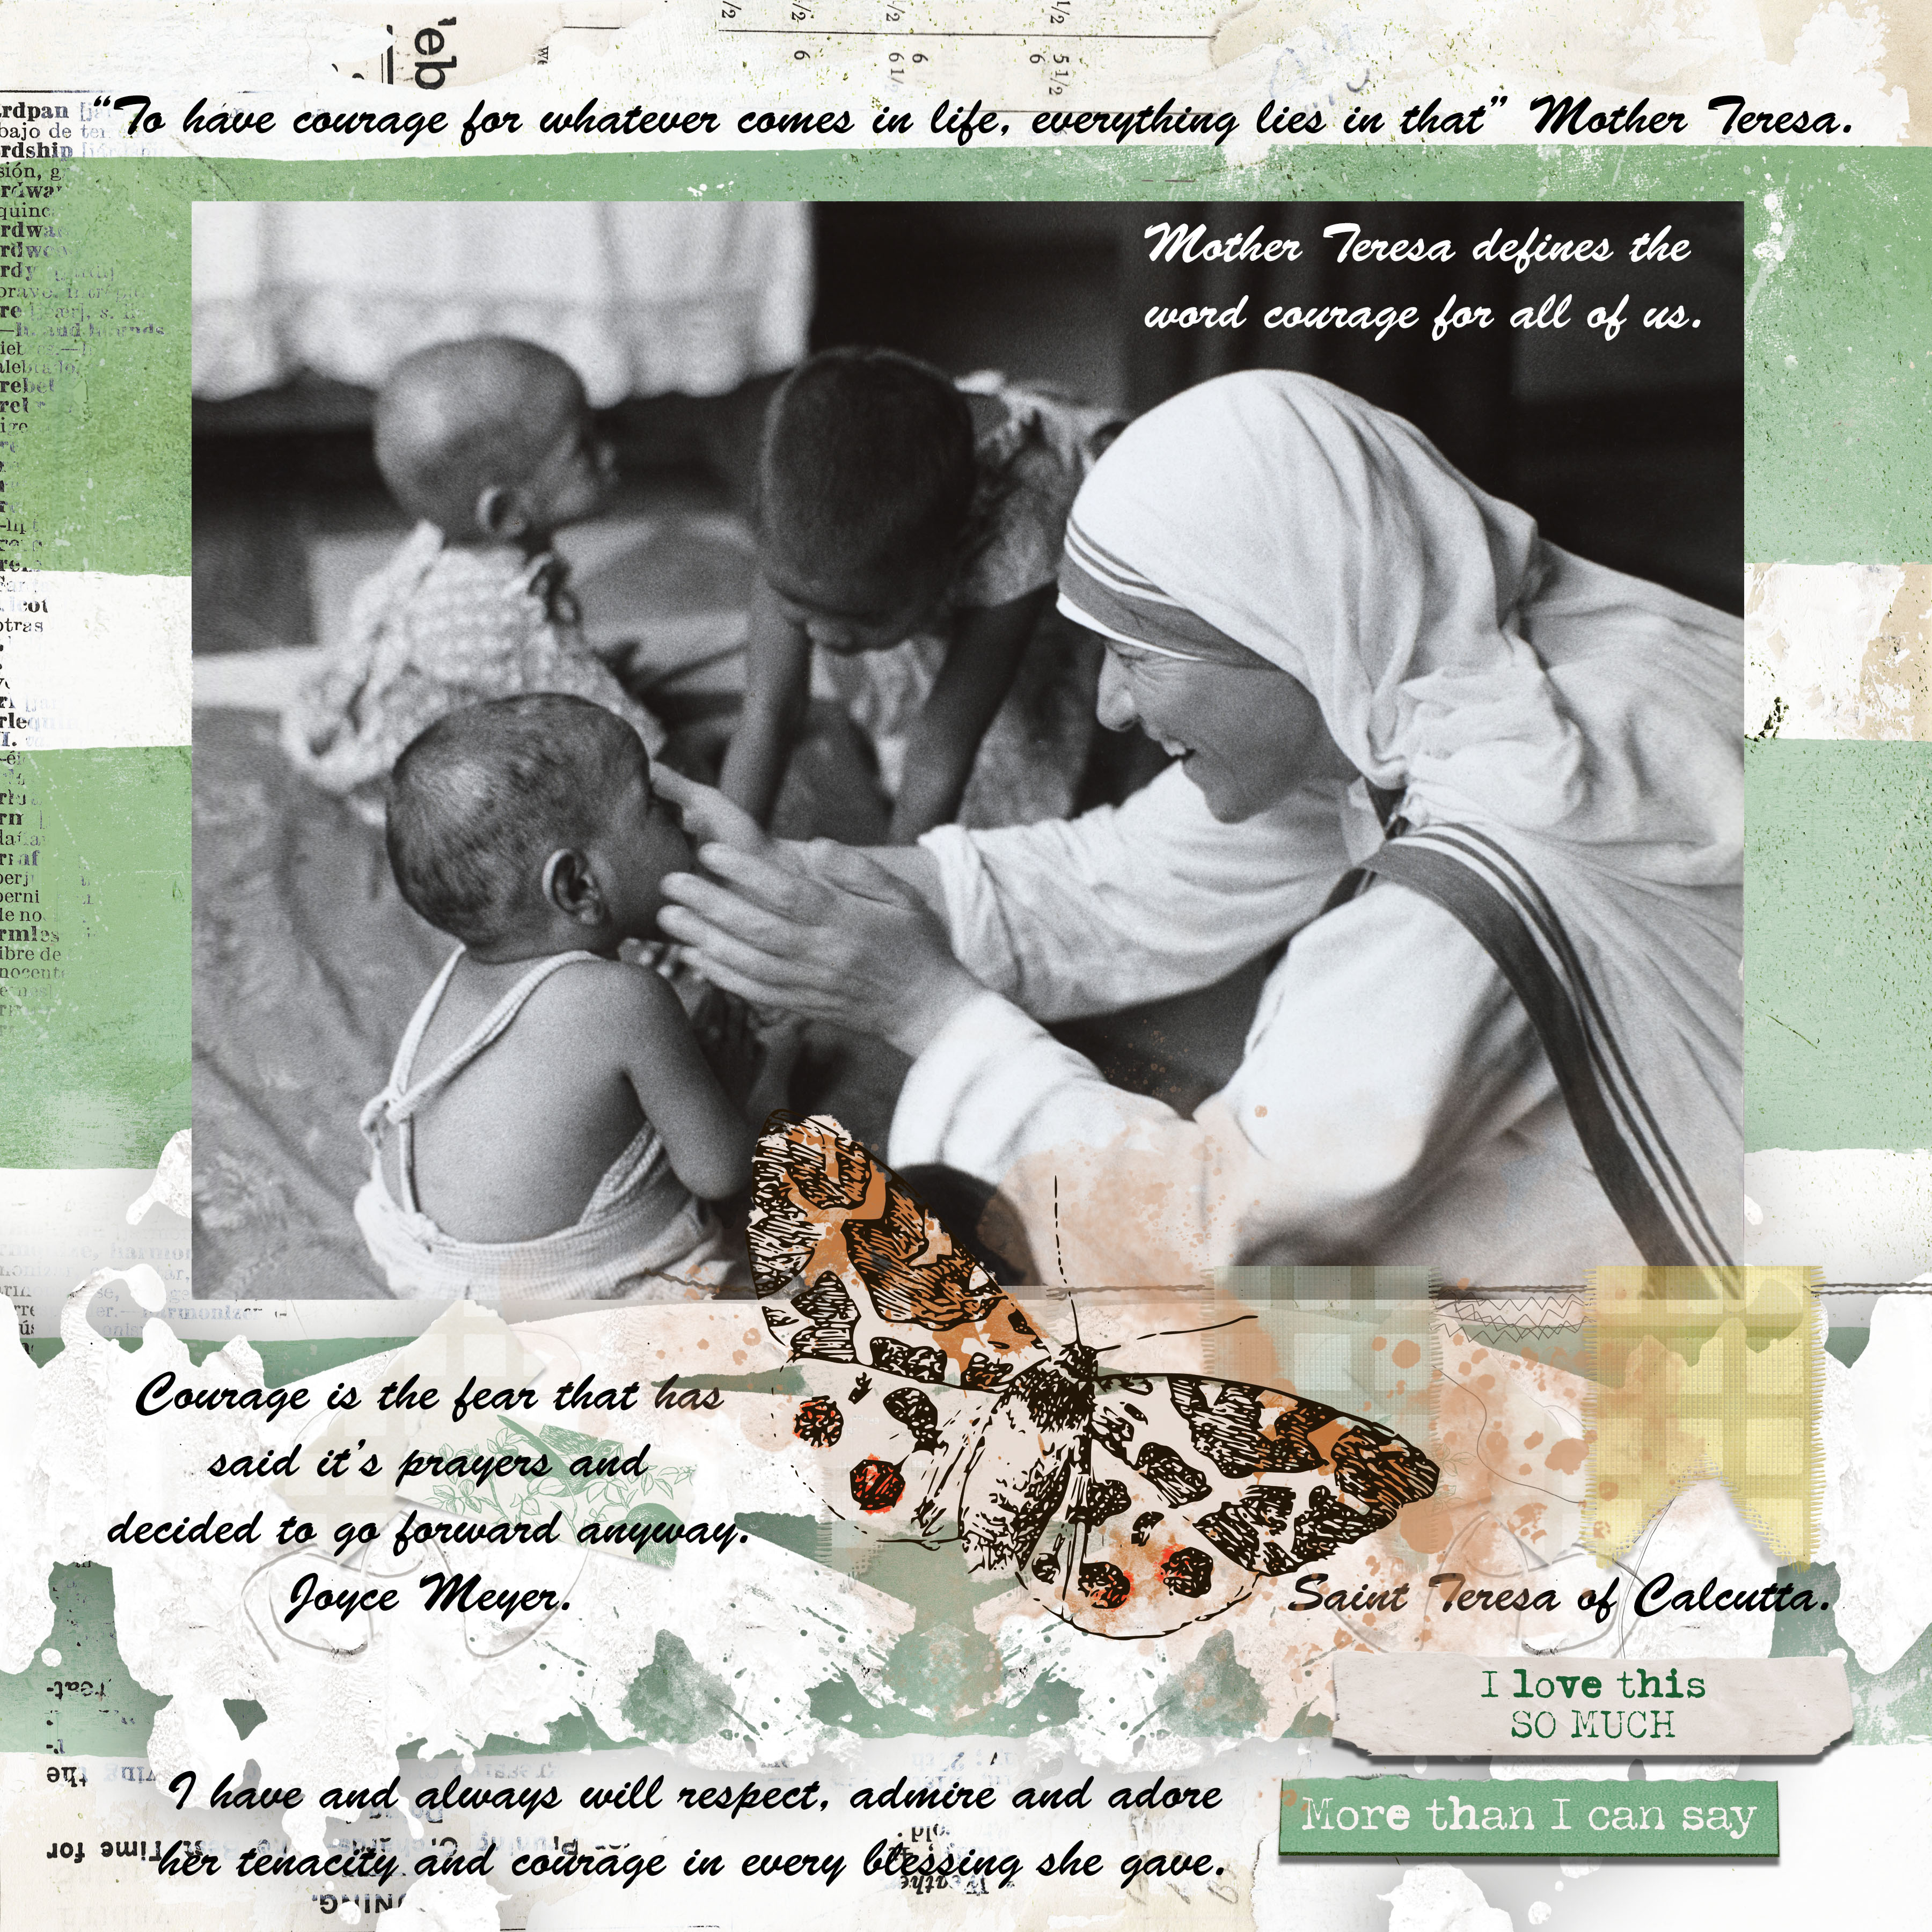 The Most Courageous Woman Mother Teresa.jpg